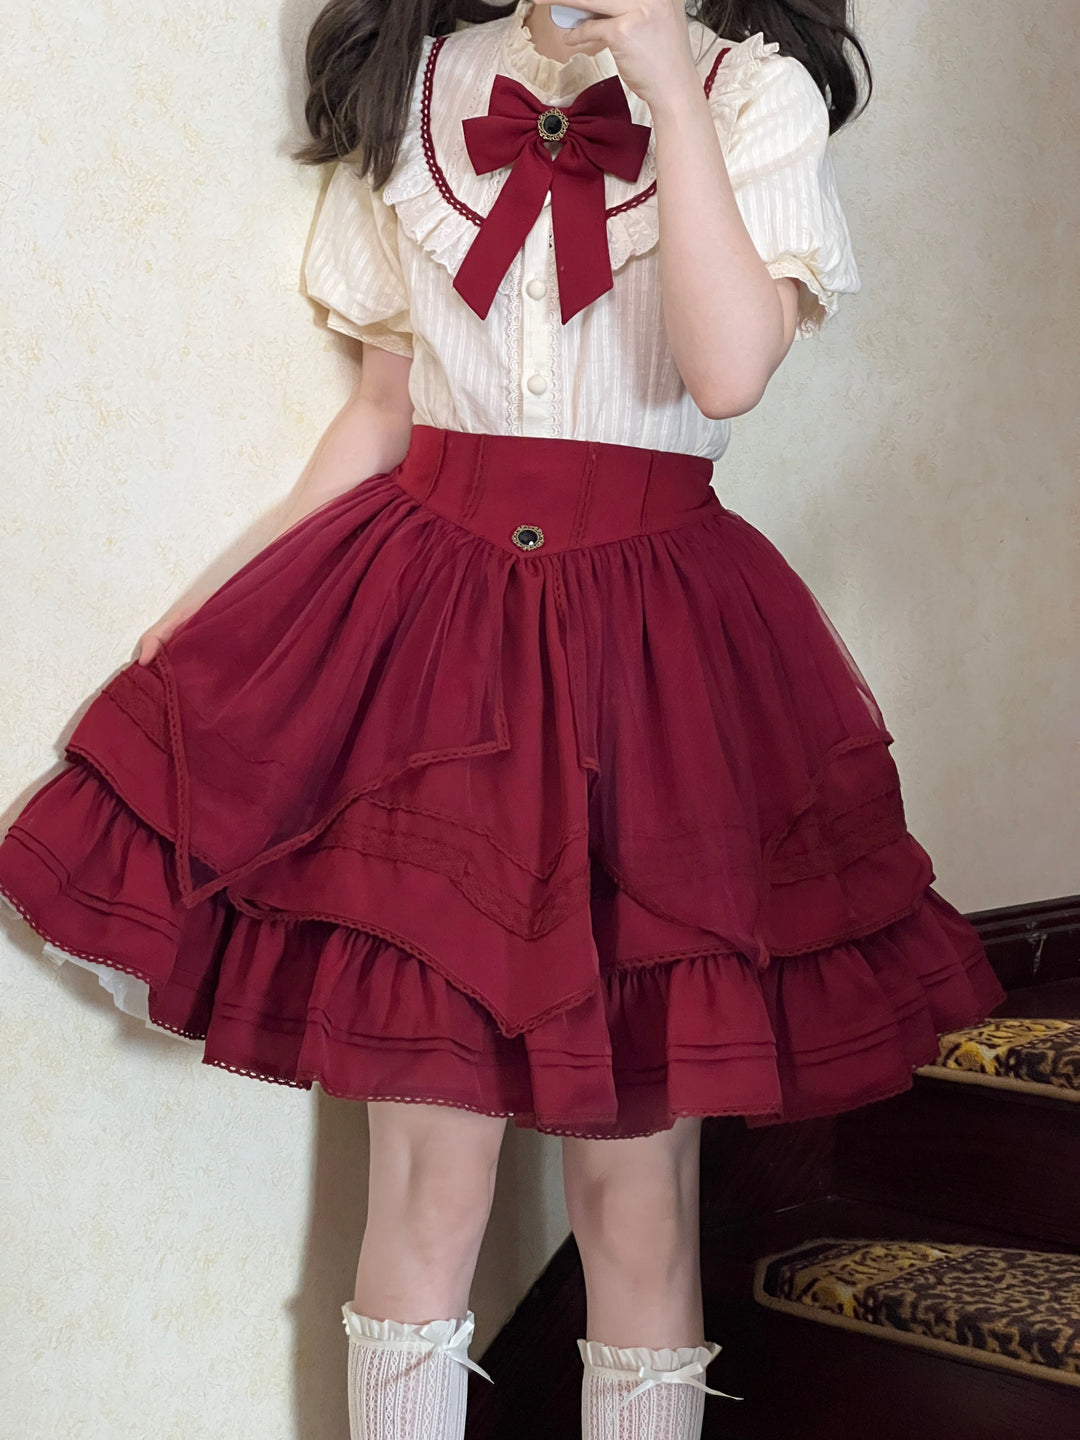 (Buy For Me) Uncle Wall Original~Rich Girl~Elegant Lolita Blouse and Skirt S red SK-short version 